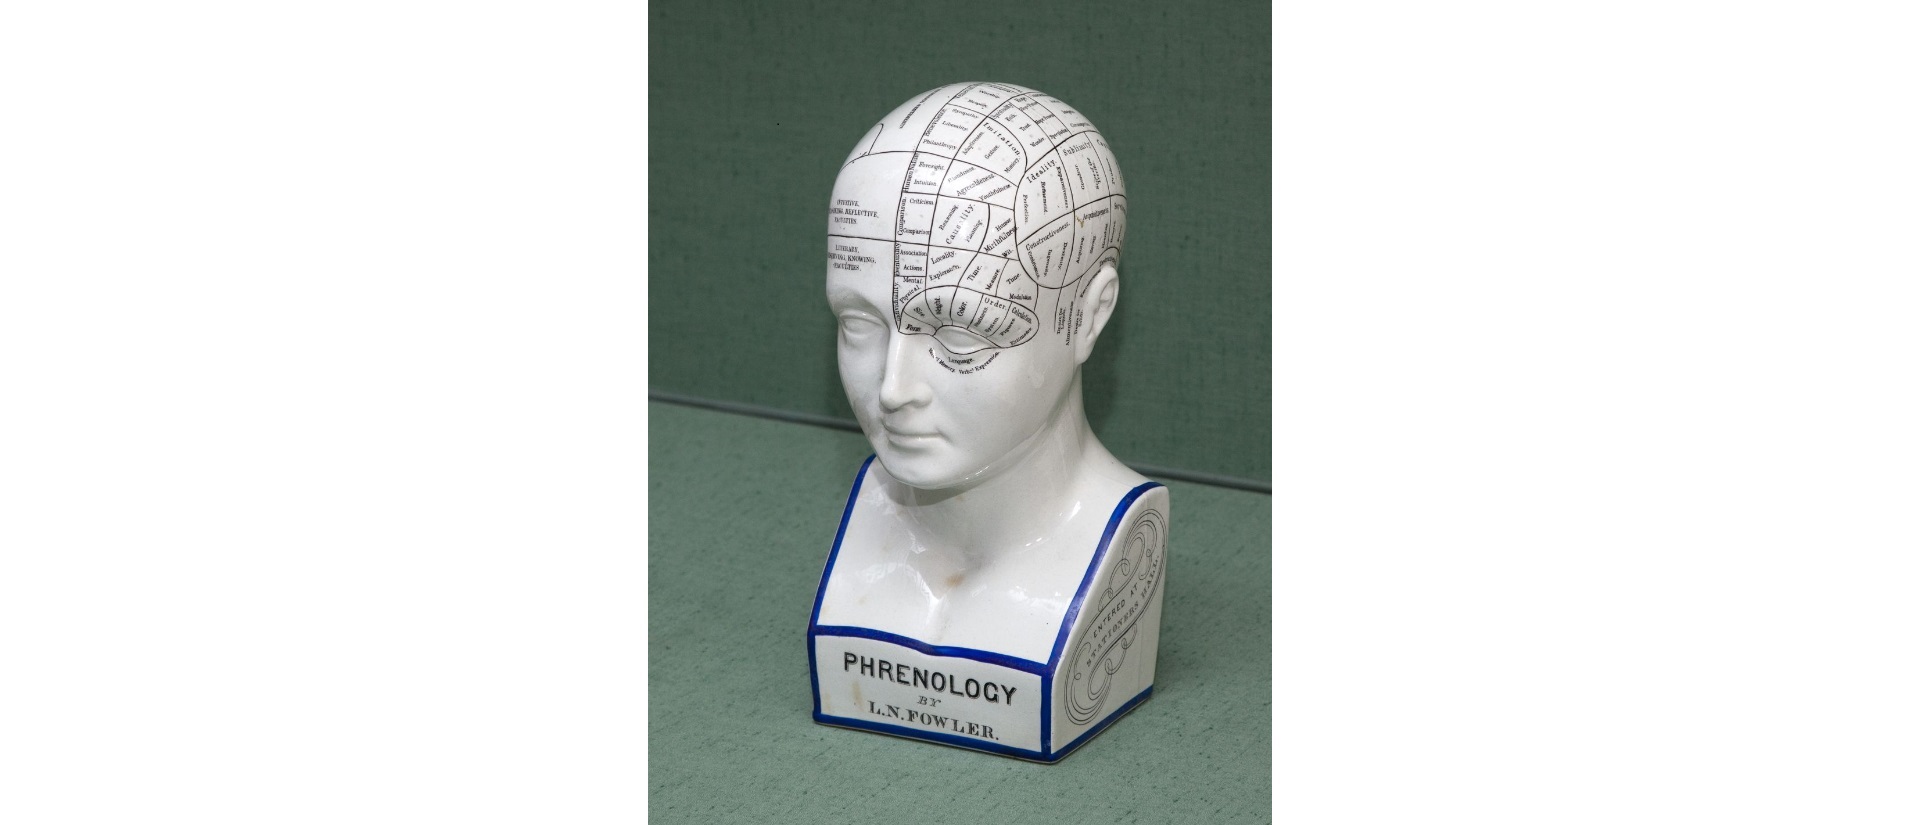 Phrenological head: a white ceramic head with black markings to show areas for different attributes 